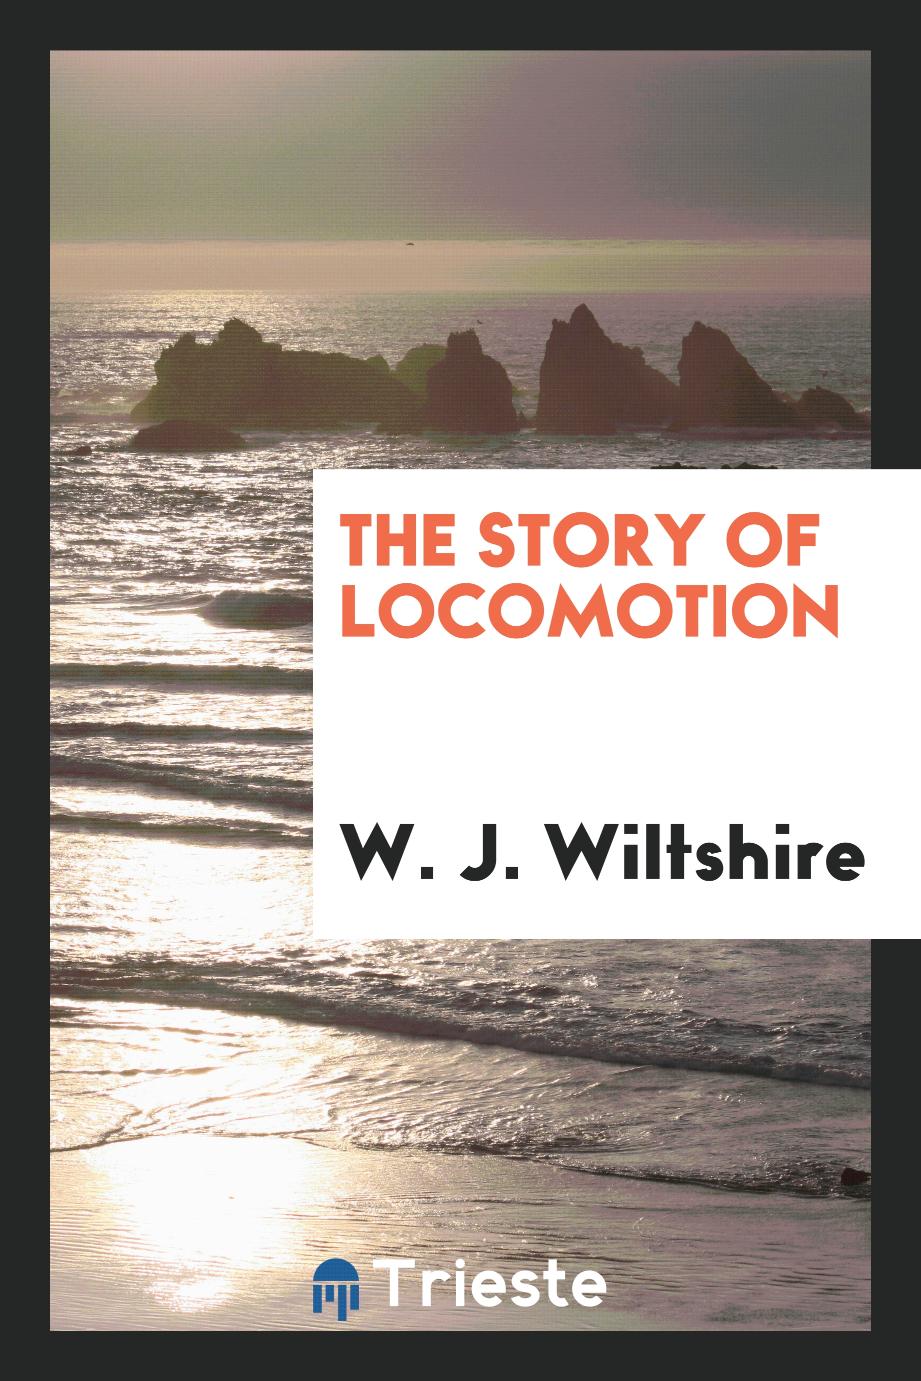 The Story of locomotion